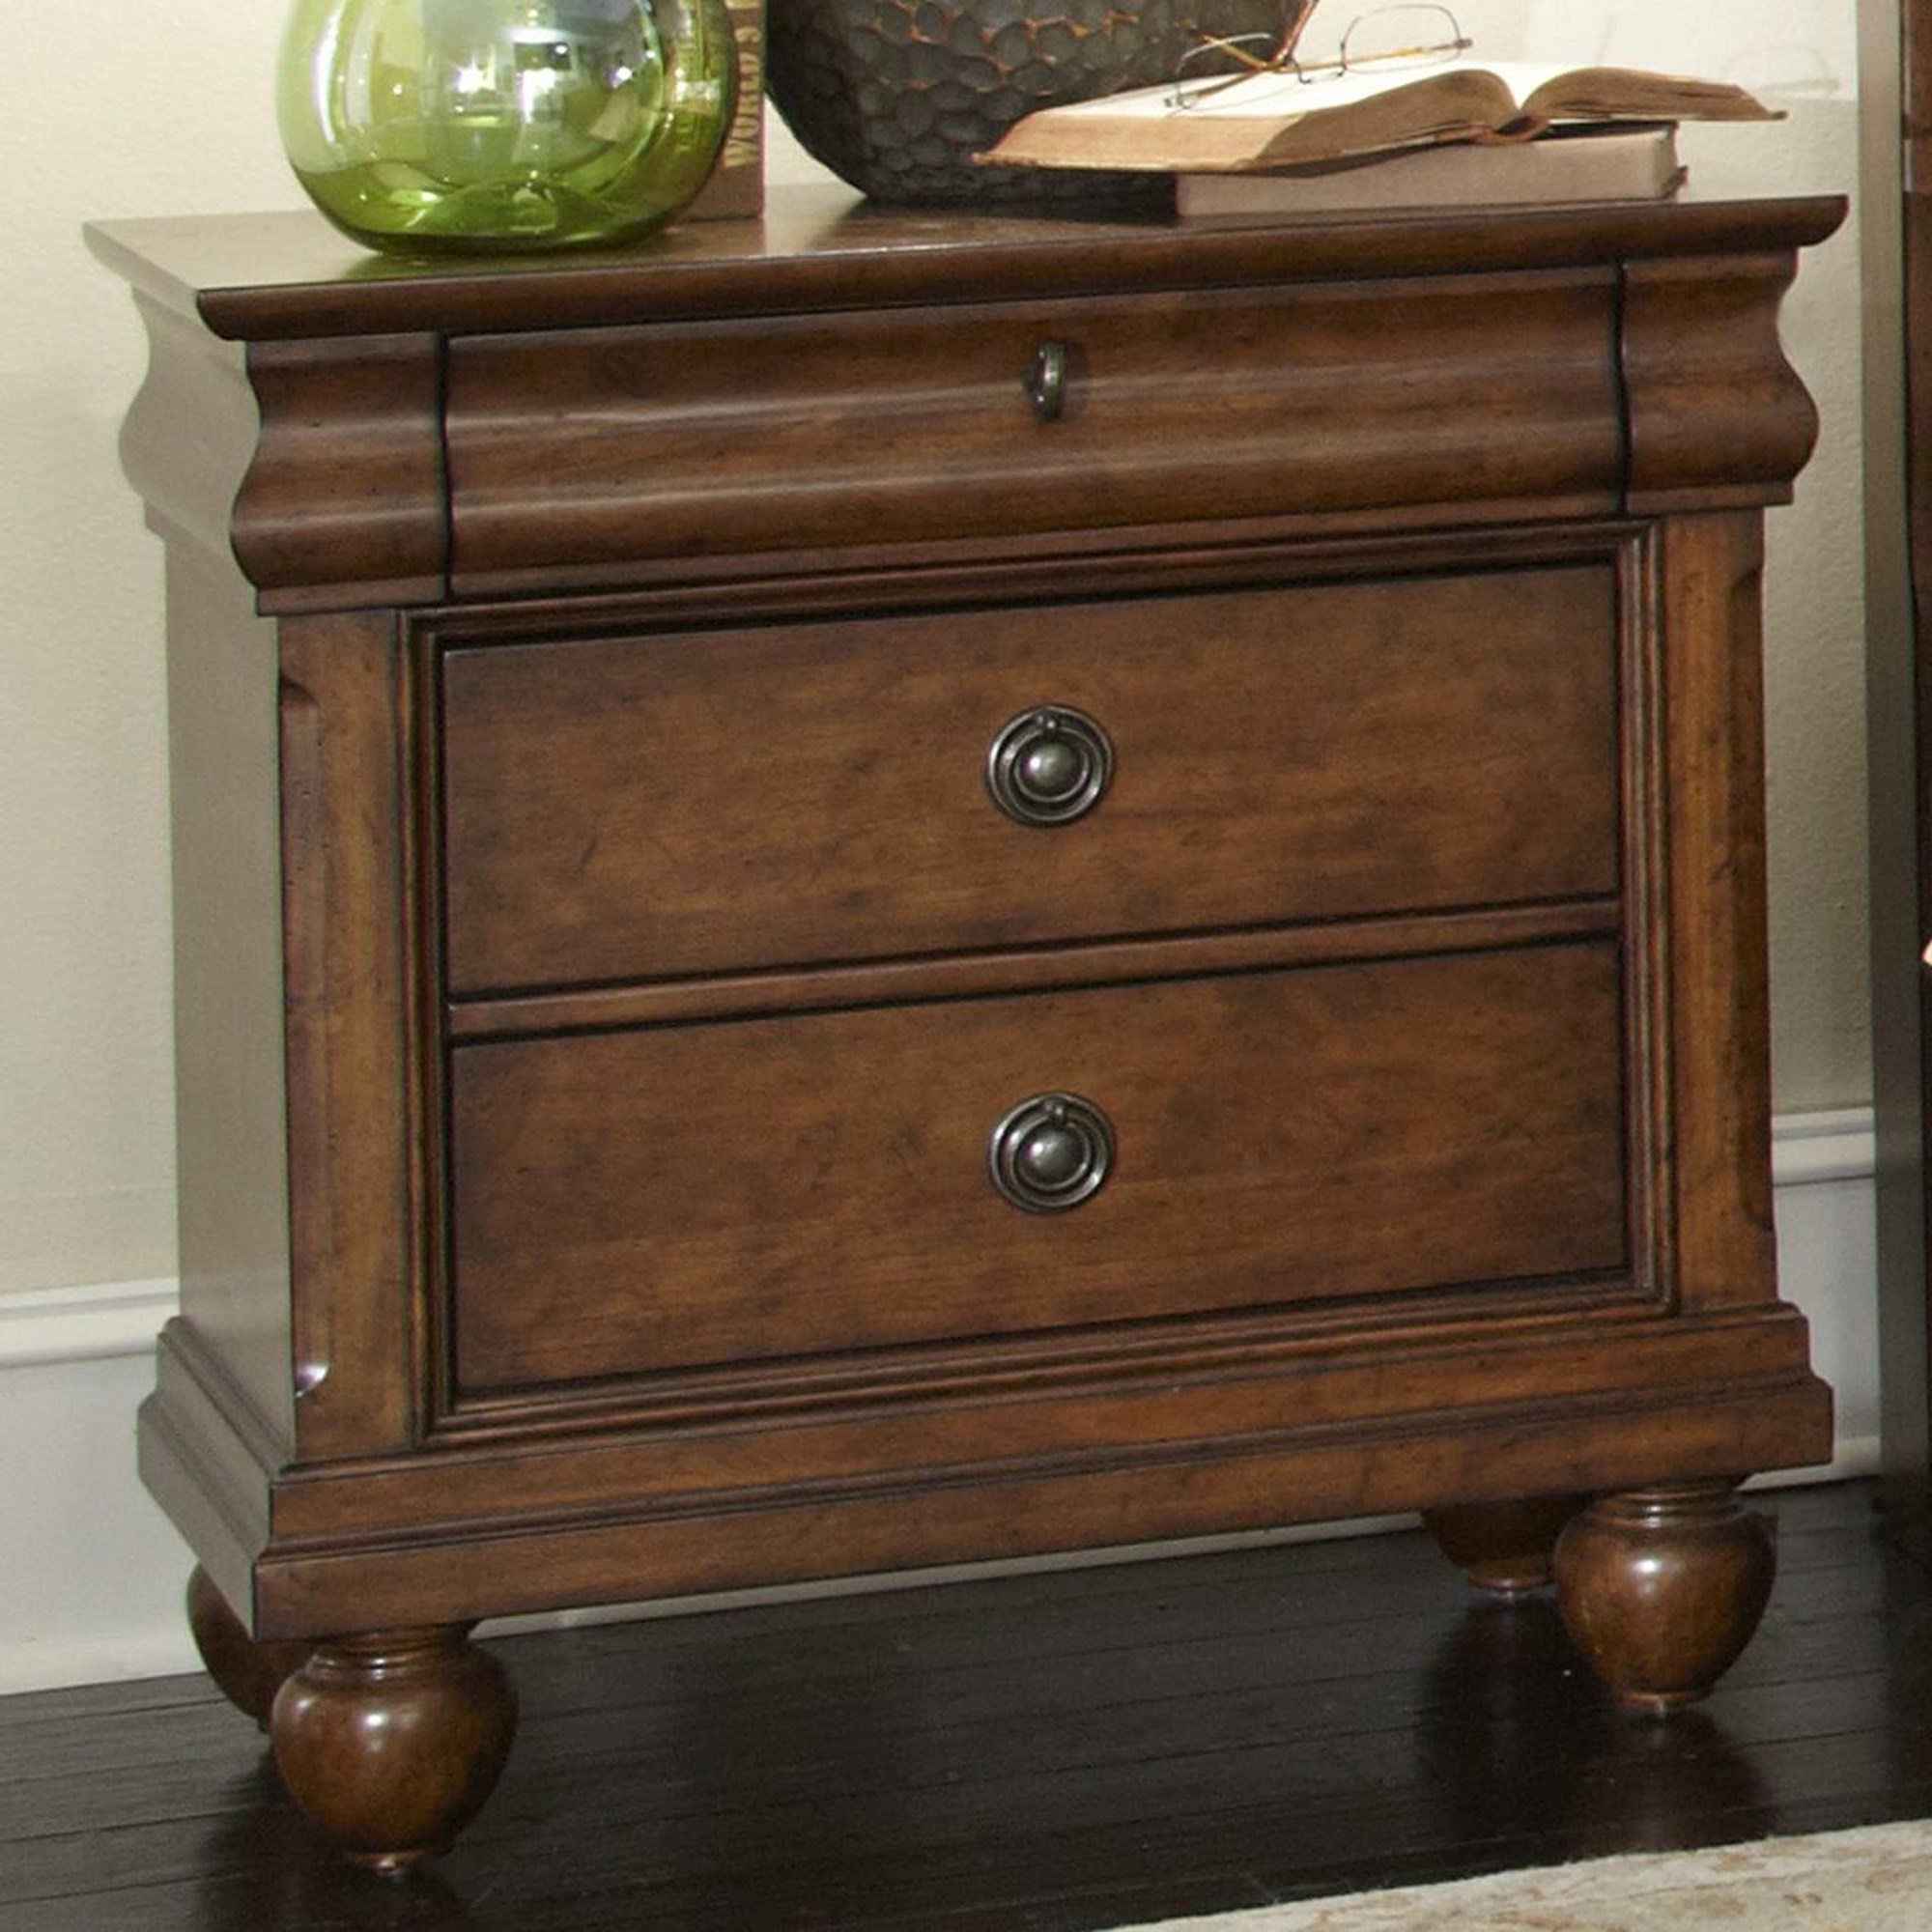 Liberty Furniture Bedroom 3 Drawer Night Stand 545-BR61